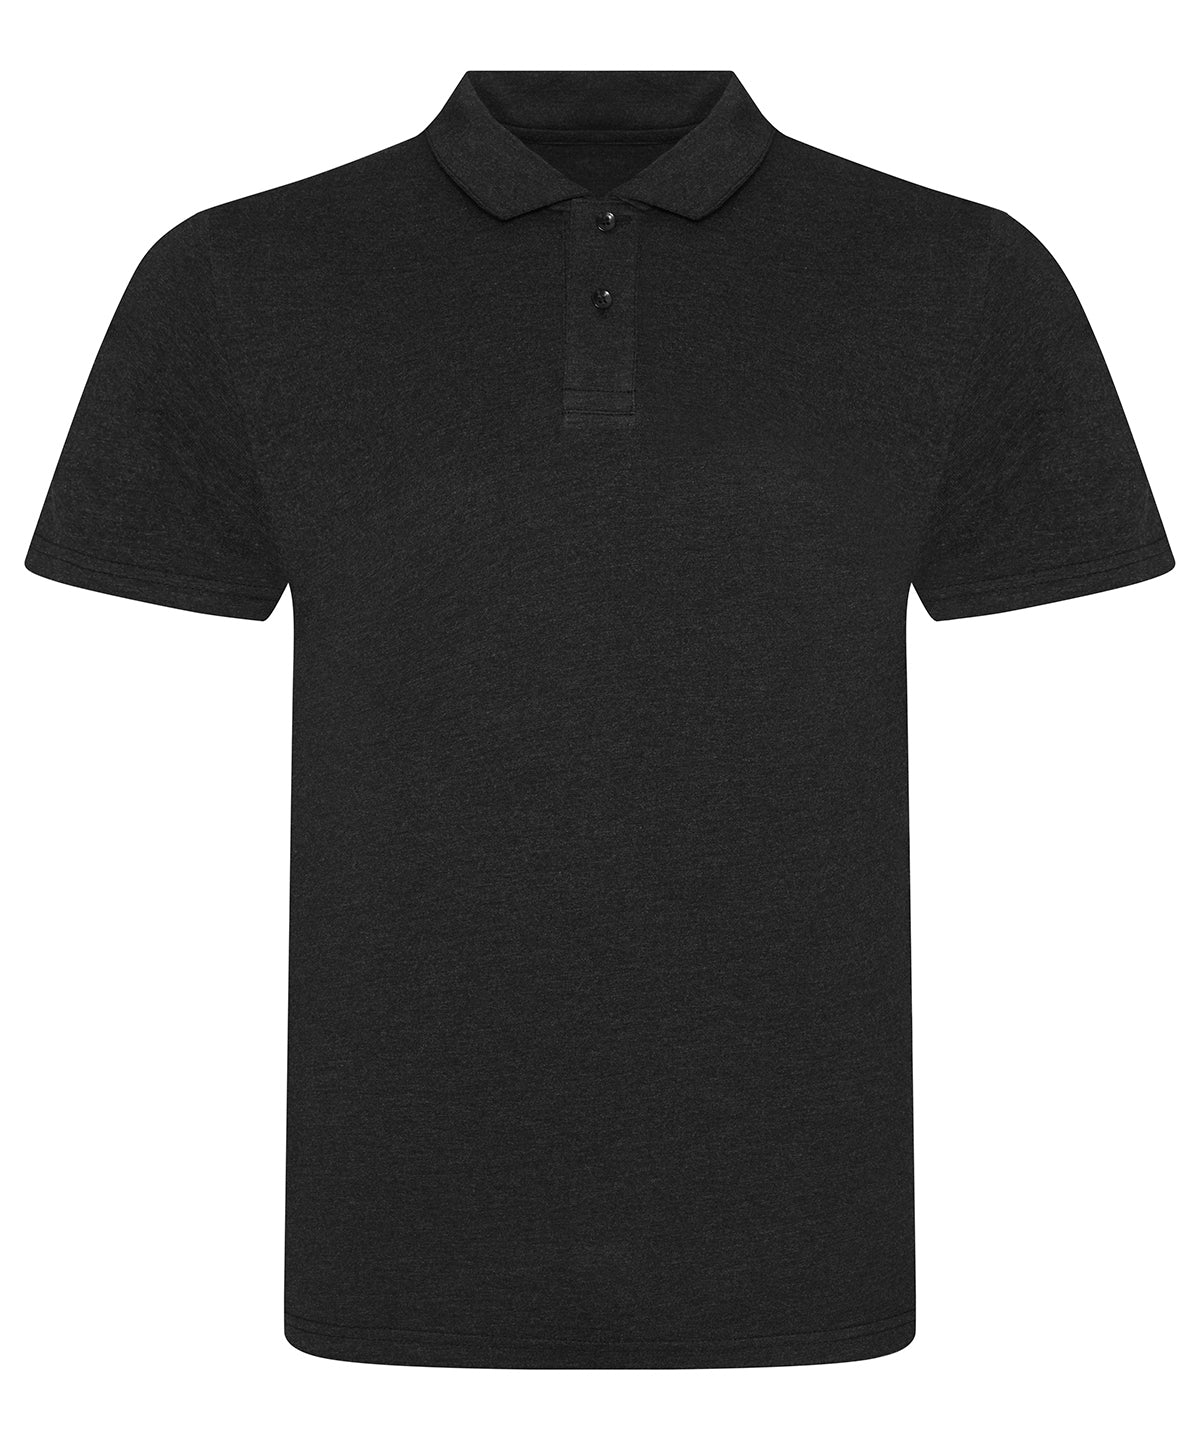 Personalised Polo Shirts - Black AWDis Just Polo's Triblend polo